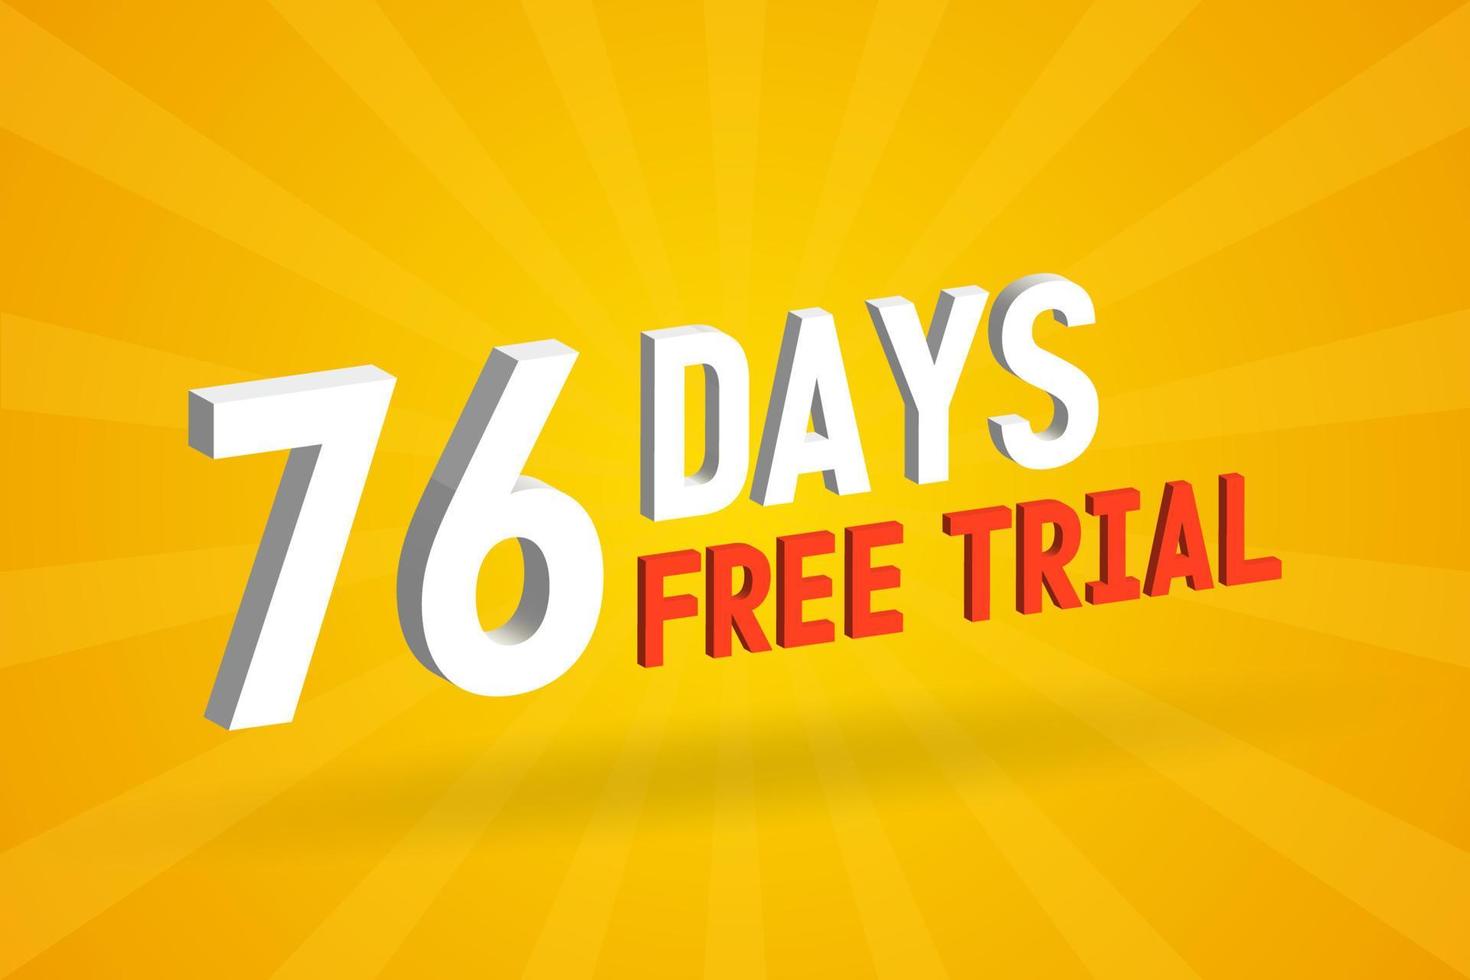 Free offer 76 Days free Trial 3D text stock vector